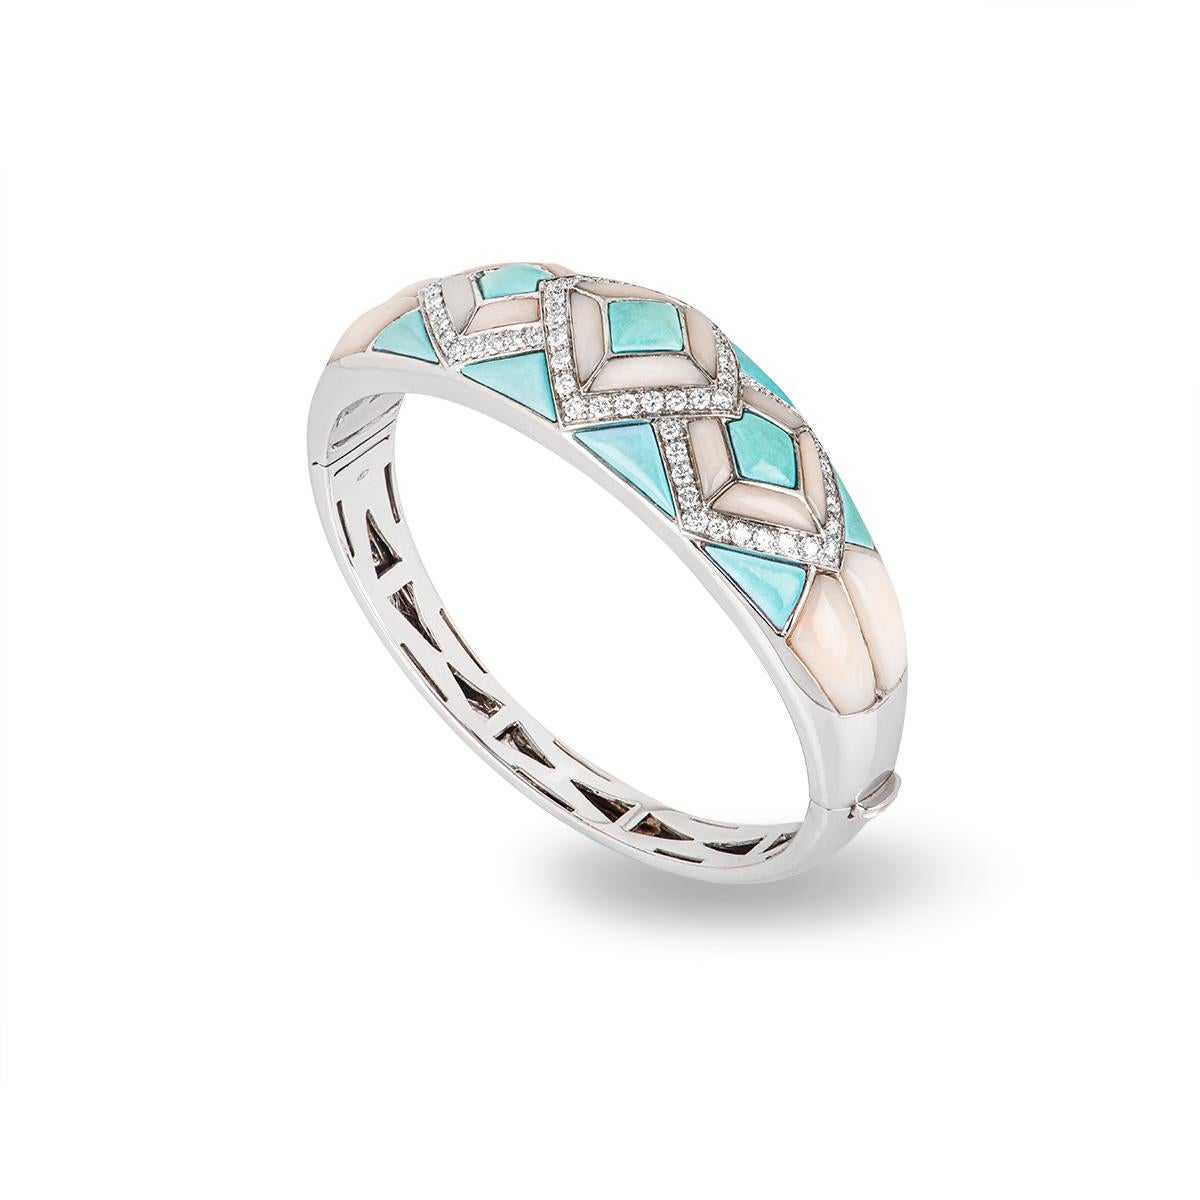 An 18k white gold turquoise, coral and diamond bangle. The bangle comprises of turquoise and coral set in a mosaic pattern with 3 rhombus shapes set with round brilliant cut diamonds. The 68 diamonds have an approximate weight of 2.04ct. The bangle